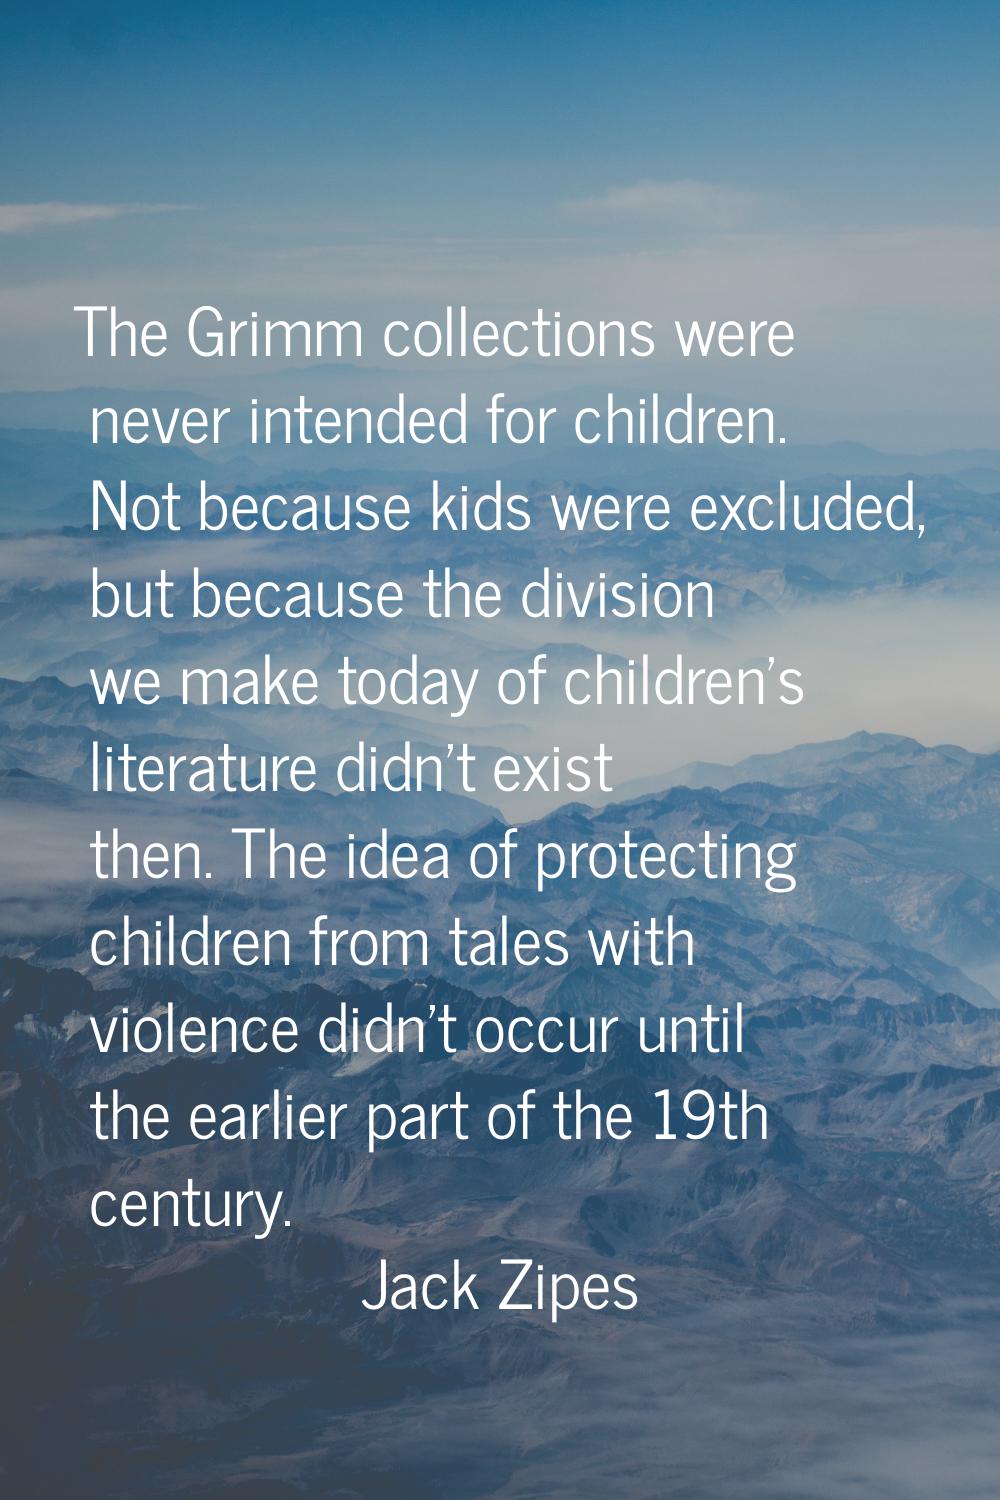 The Grimm collections were never intended for children. Not because kids were excluded, but because